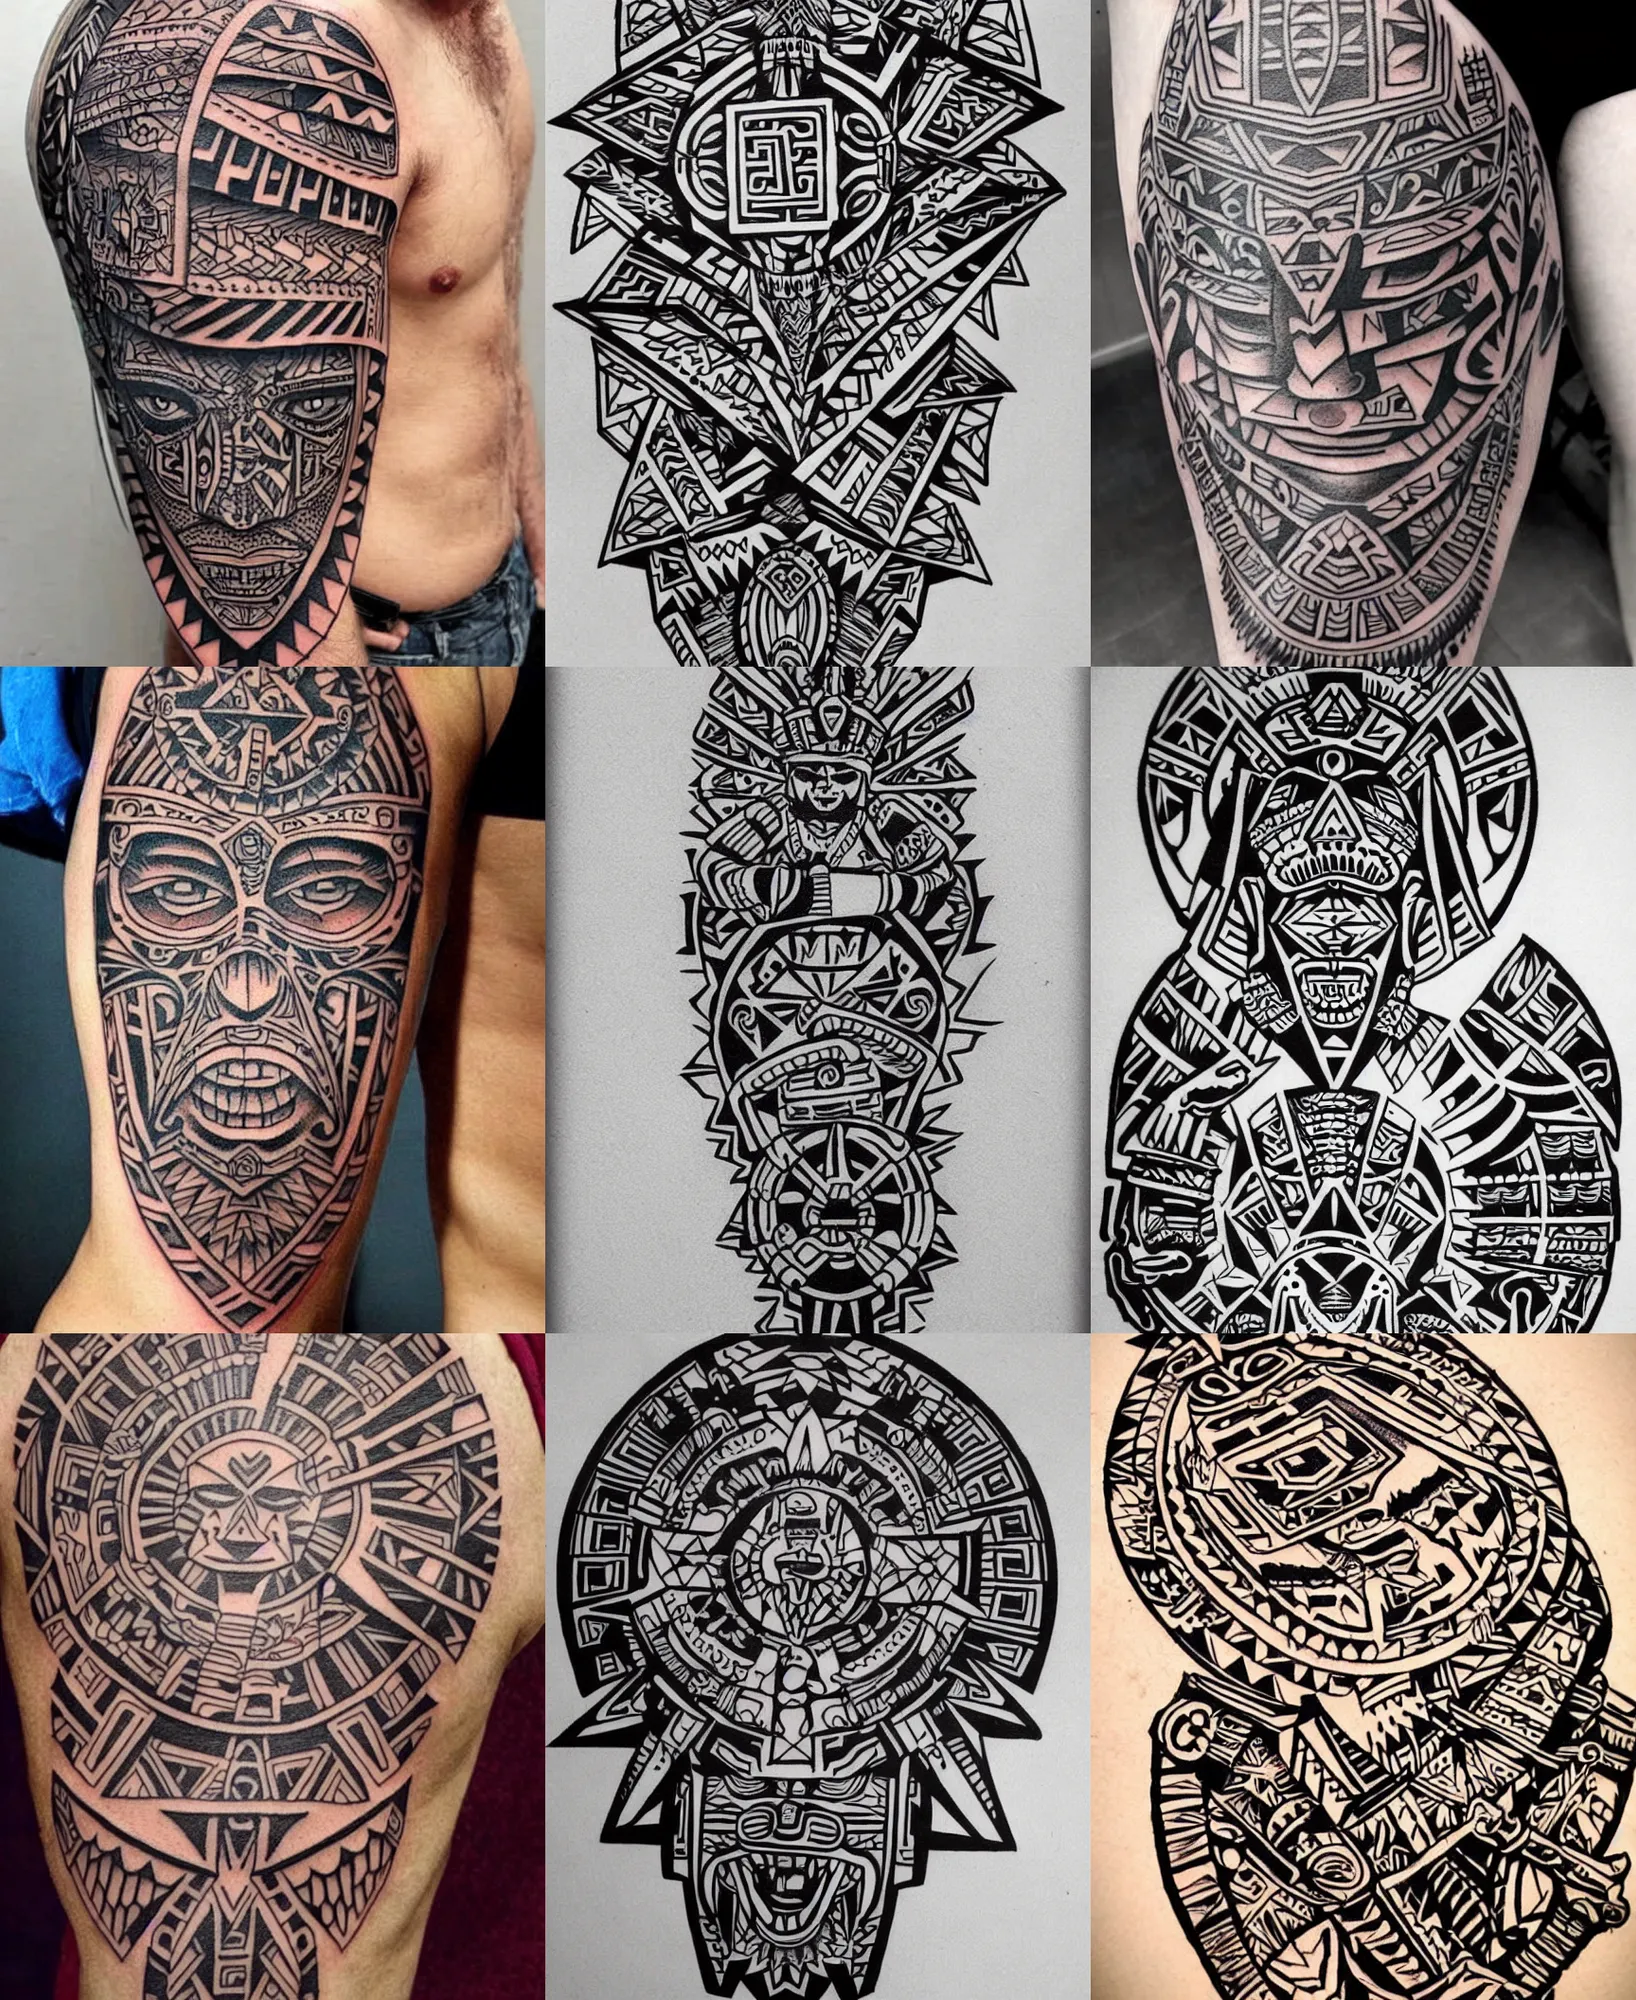 160 Aztec Tattoo Ideas for Men and Women - The Body is a Canvas | Aztec  tattoo, Aztec tattoo designs, Mayan tattoos